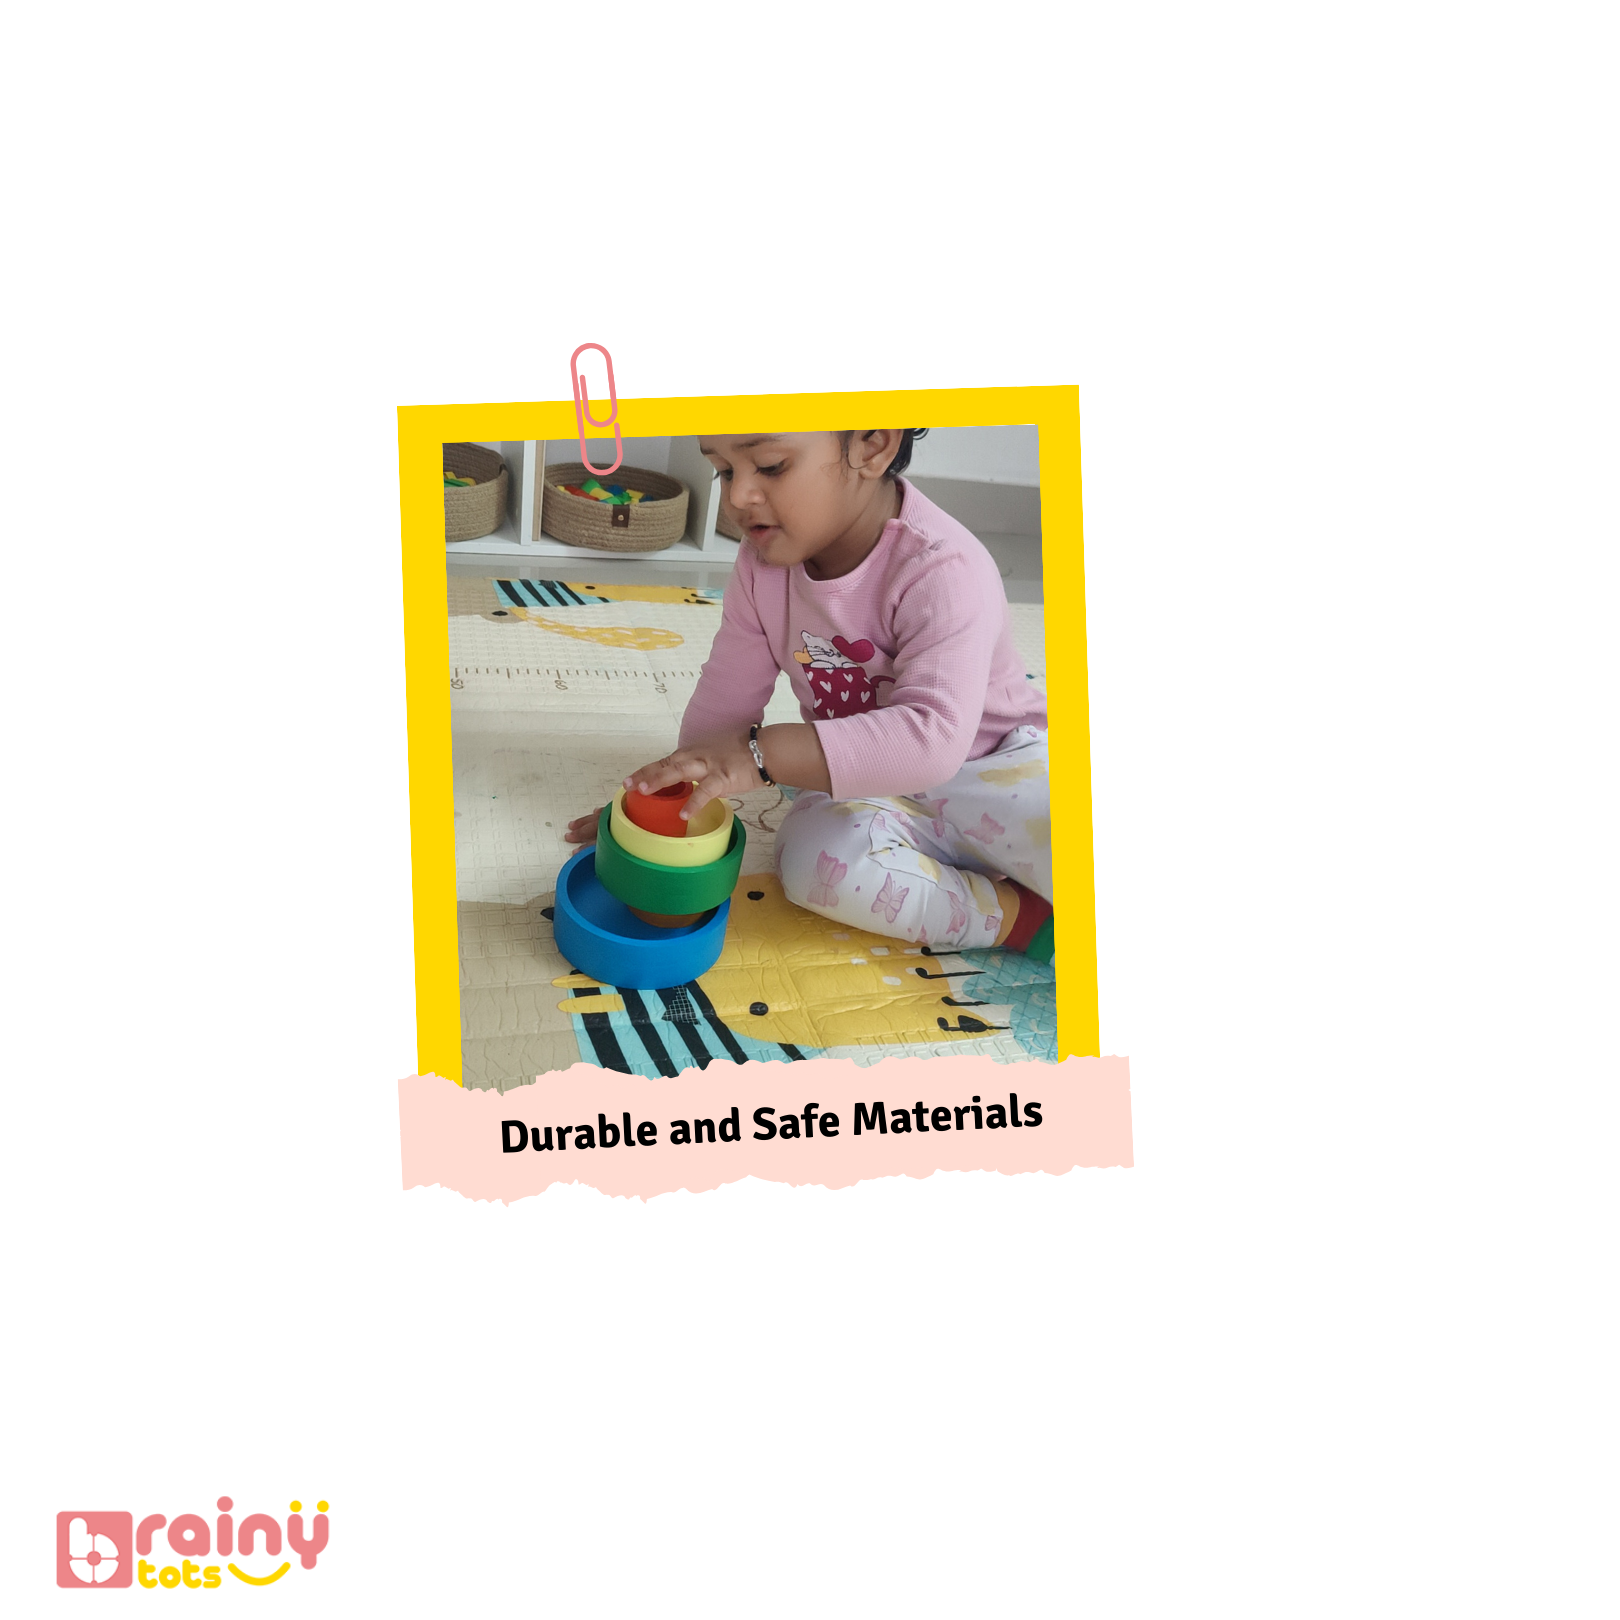 Features of our Nesting Bowls, designed for babies aged 6 months and up. These Montessori toys enhance problem-solving skills, fine motor abilities, and cognitive development. Made from safe, durable materials, they are perfect for stacking, sorting, and sensory exploration. Ideal for early learning and interactive play.